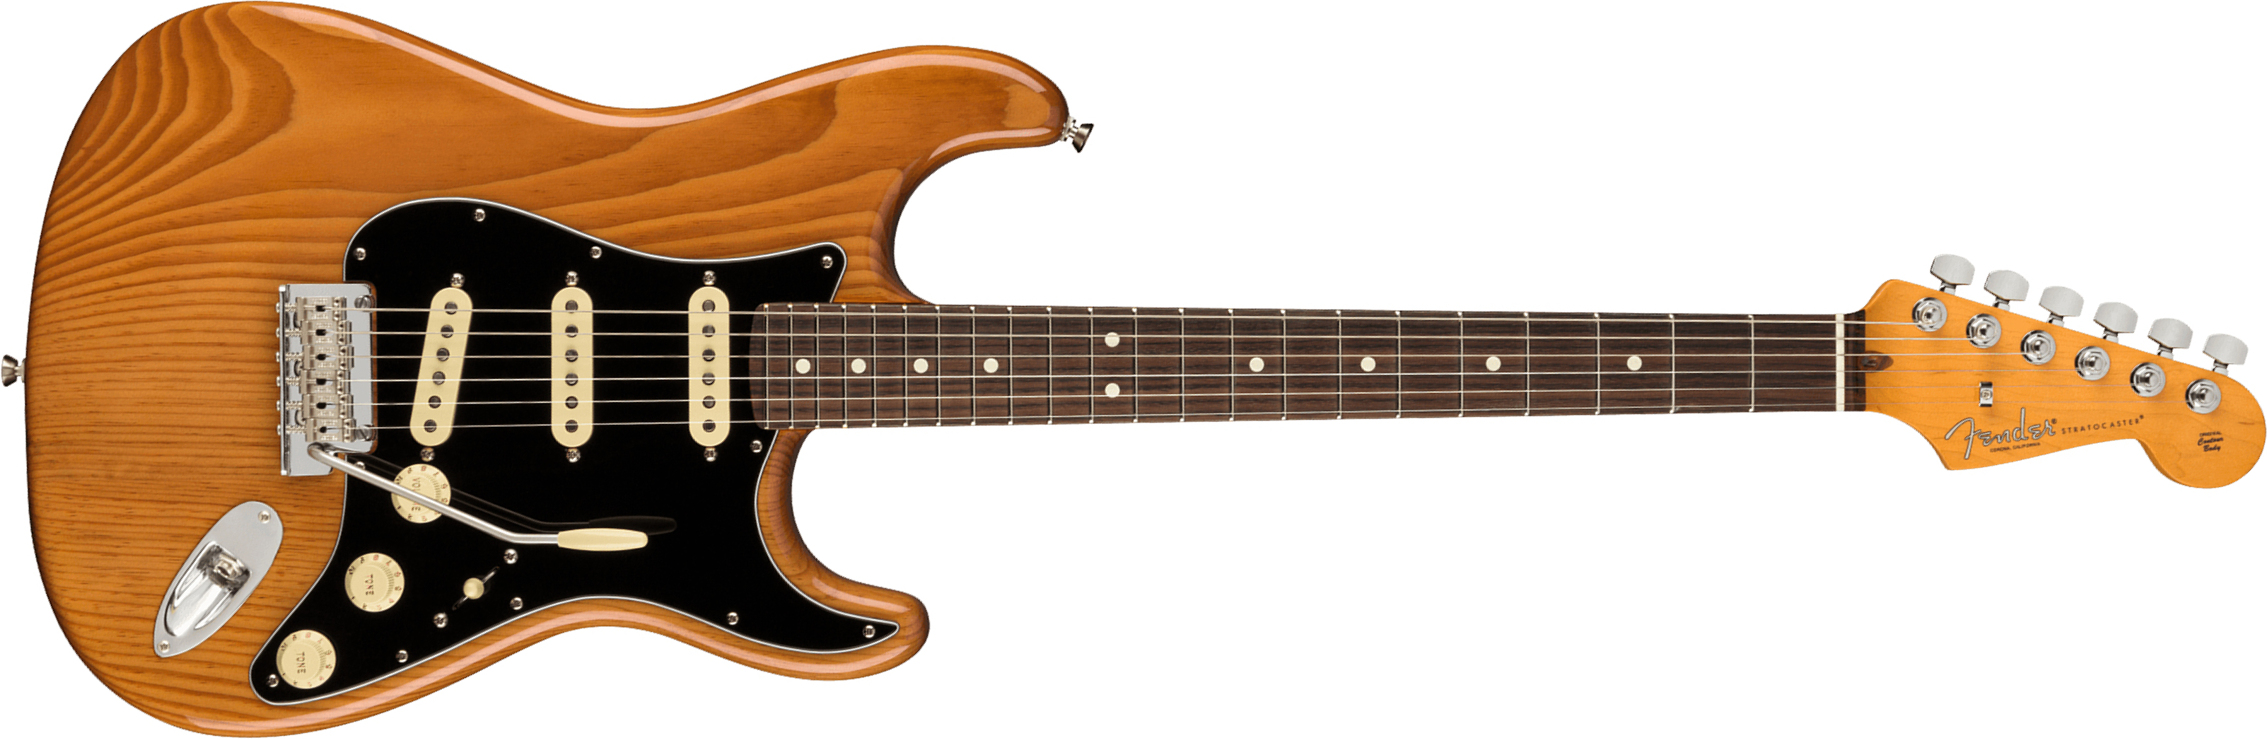 Fender Strat American Professional Ii Usa Rw - Roasted Pine - E-Gitarre in Str-Form - Main picture